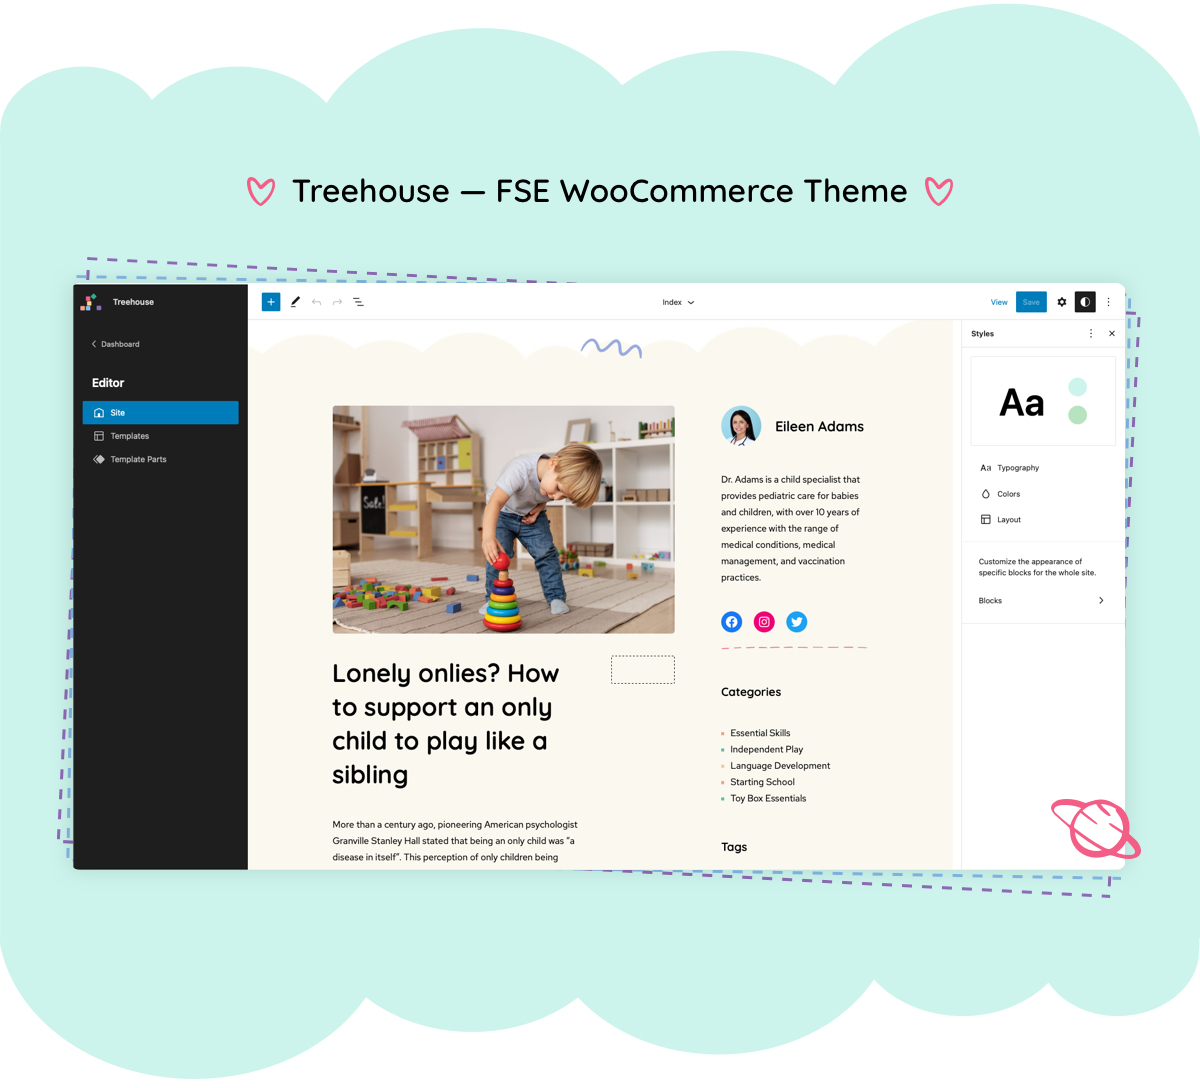 Treehouse Toys and Games - FSE WooCommerce Theme